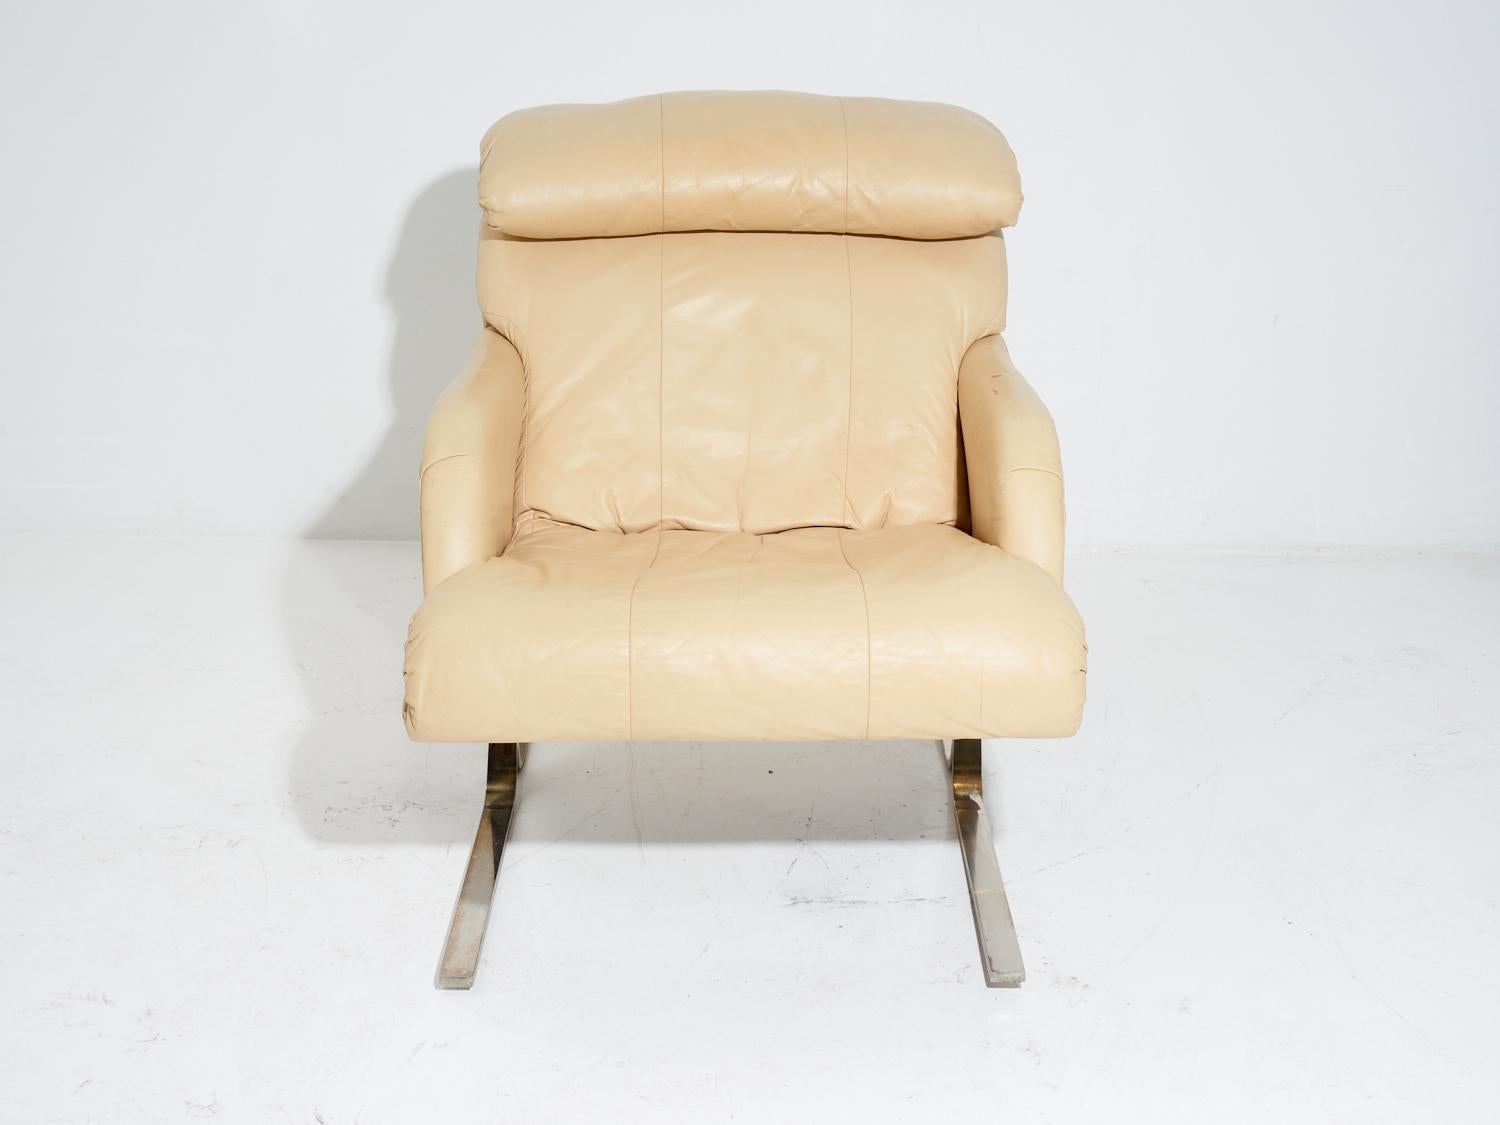 Say hello to the vintage tan leather lounge chair, a faithful companion for all your lounging needs. Whether you're taking a cat NAP, binging your favorite show, or simply soaking in the sun, this chair will be there to provide the support you